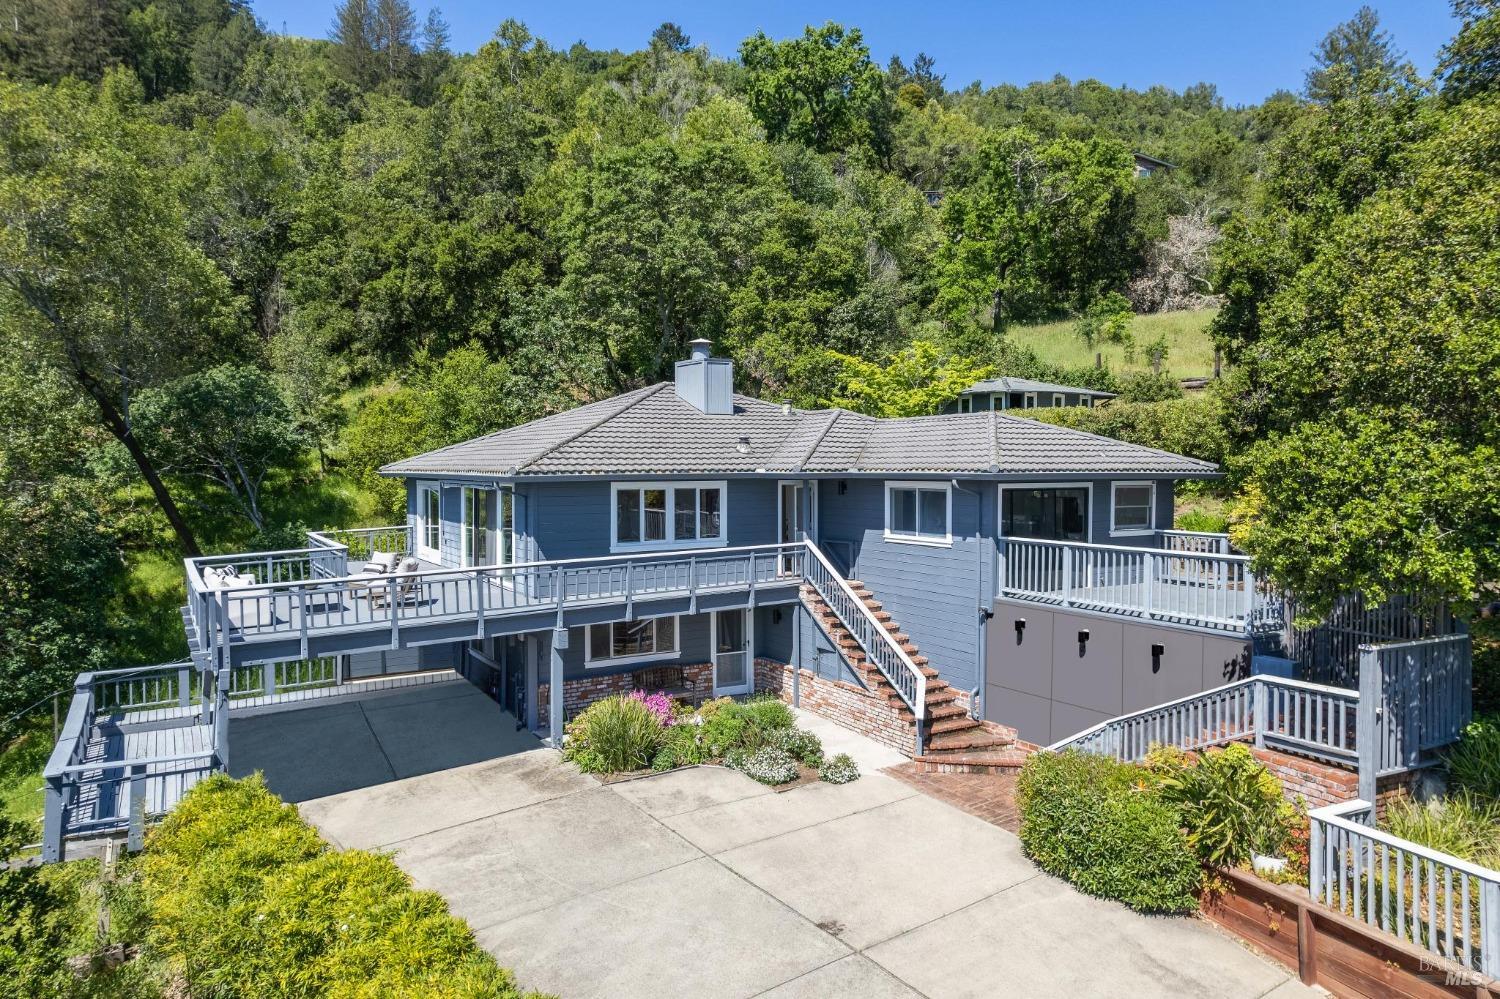 Nestled on nearly TWO acres in the coveted Town of Ross, 11 Woodhaven Road offers a unique opportunity to embrace tranquil living with stunning Mt Tam views. This captivating property has been lovingly maintained by its owners for 67 years, presenting a rare chance to transform it into your dream home. Spanning 2,614 square feet, the residence boasts generous living spaces flooded with natural light, creating an inviting atmosphere throughout. The prime location in Ross ensures proximity to top-rated schools, lush parks, and convenient access to amenities. With the potential for an au-pair or ADU downstairs, the home offers versatile living arrangements to suit various lifestyles. The spacious primary suite features an ensuite bathroom and expansive walk-in closet, providing a private sanctuary for relaxation. Outside, discover a sprawling outdoor oasis with two huge entertainment decks, a wraparound patio, and a sparkling pool offering picturesque views of Mt. Tam, an ideal setting for outdoor gatherings and summer enjoyment. Additional highlights include hardwood flooring, custom built-ins, and a cozy family room with a fireplace. Embrace the quintessential Ross lifestyle and make this exquisite property your own. Located in the highly-regarded Ross School District!